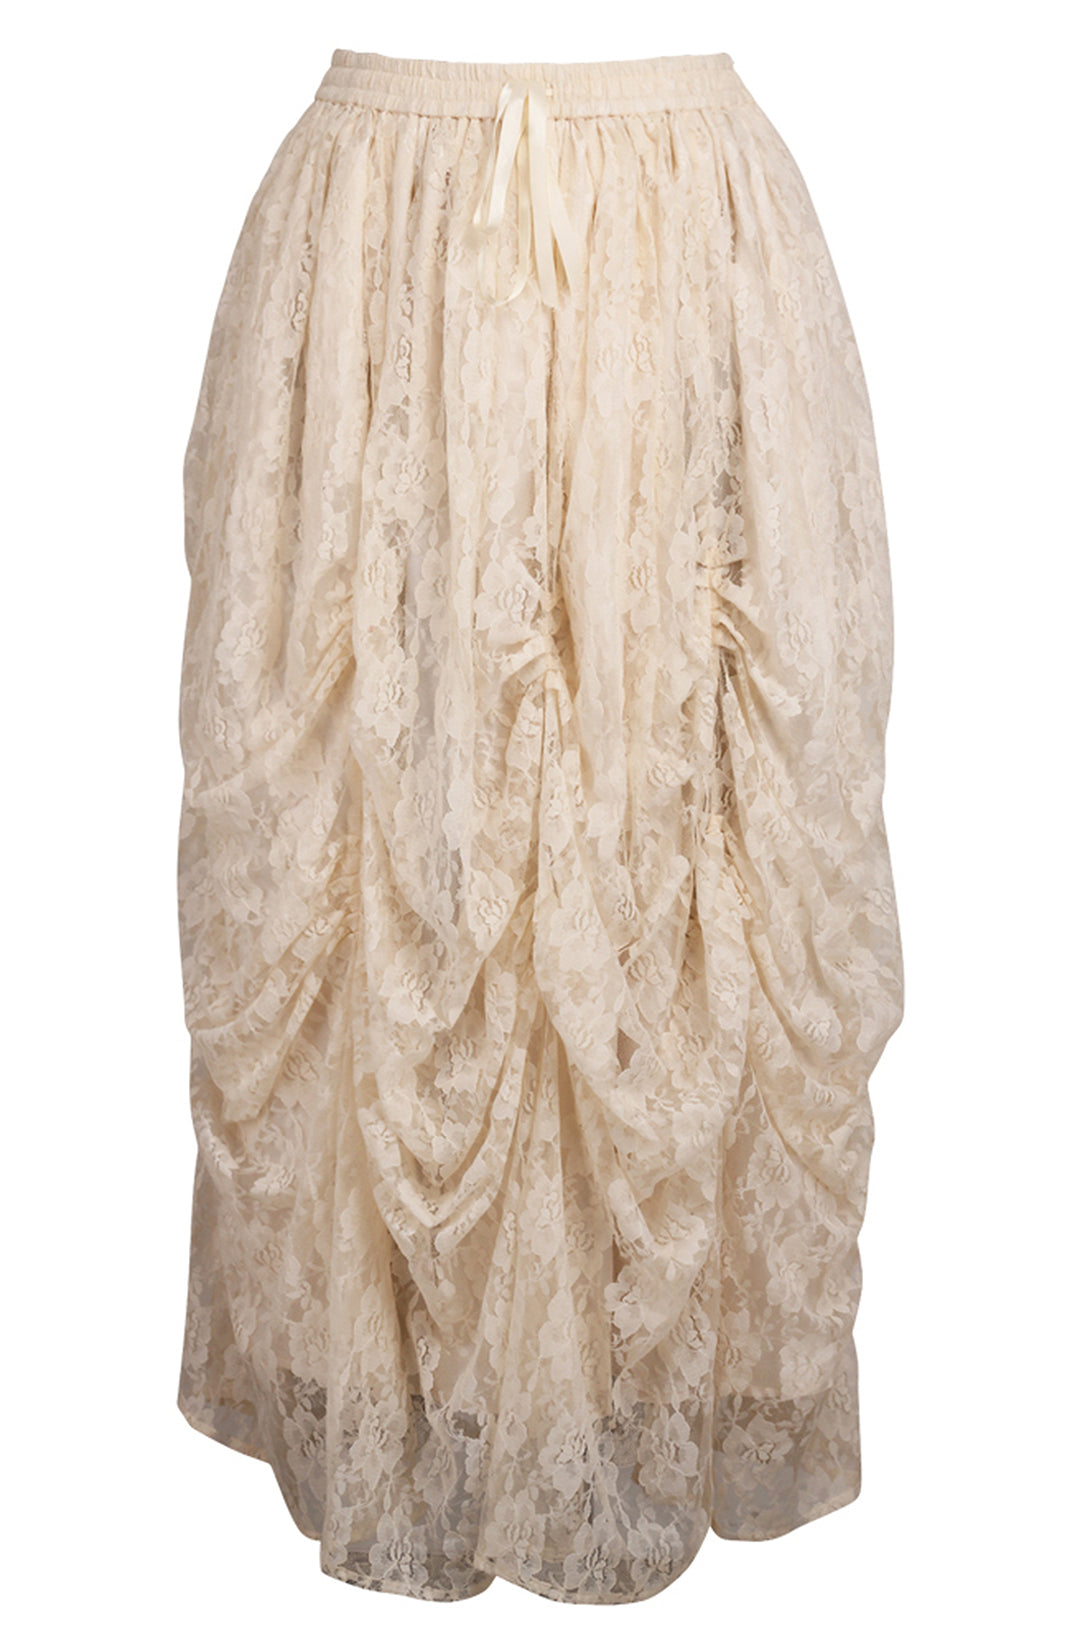 Cream Lace Ball Gown Skirt 1